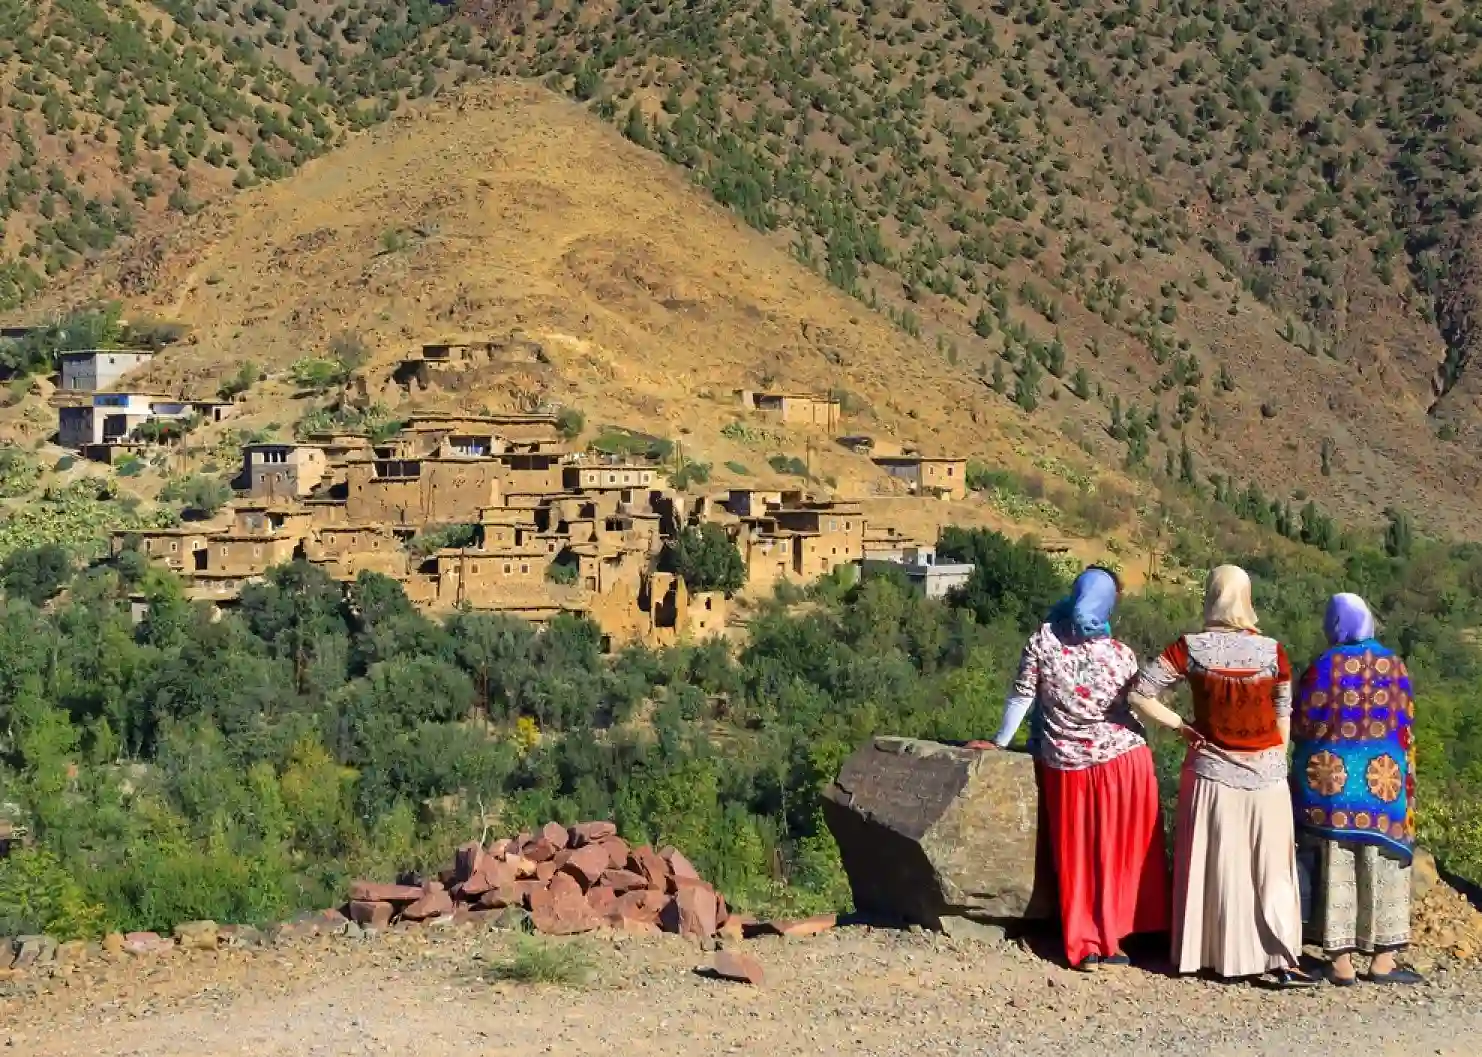 What-to-see-in-Morocco-in-a-Week-High-atlas-mountains.webp